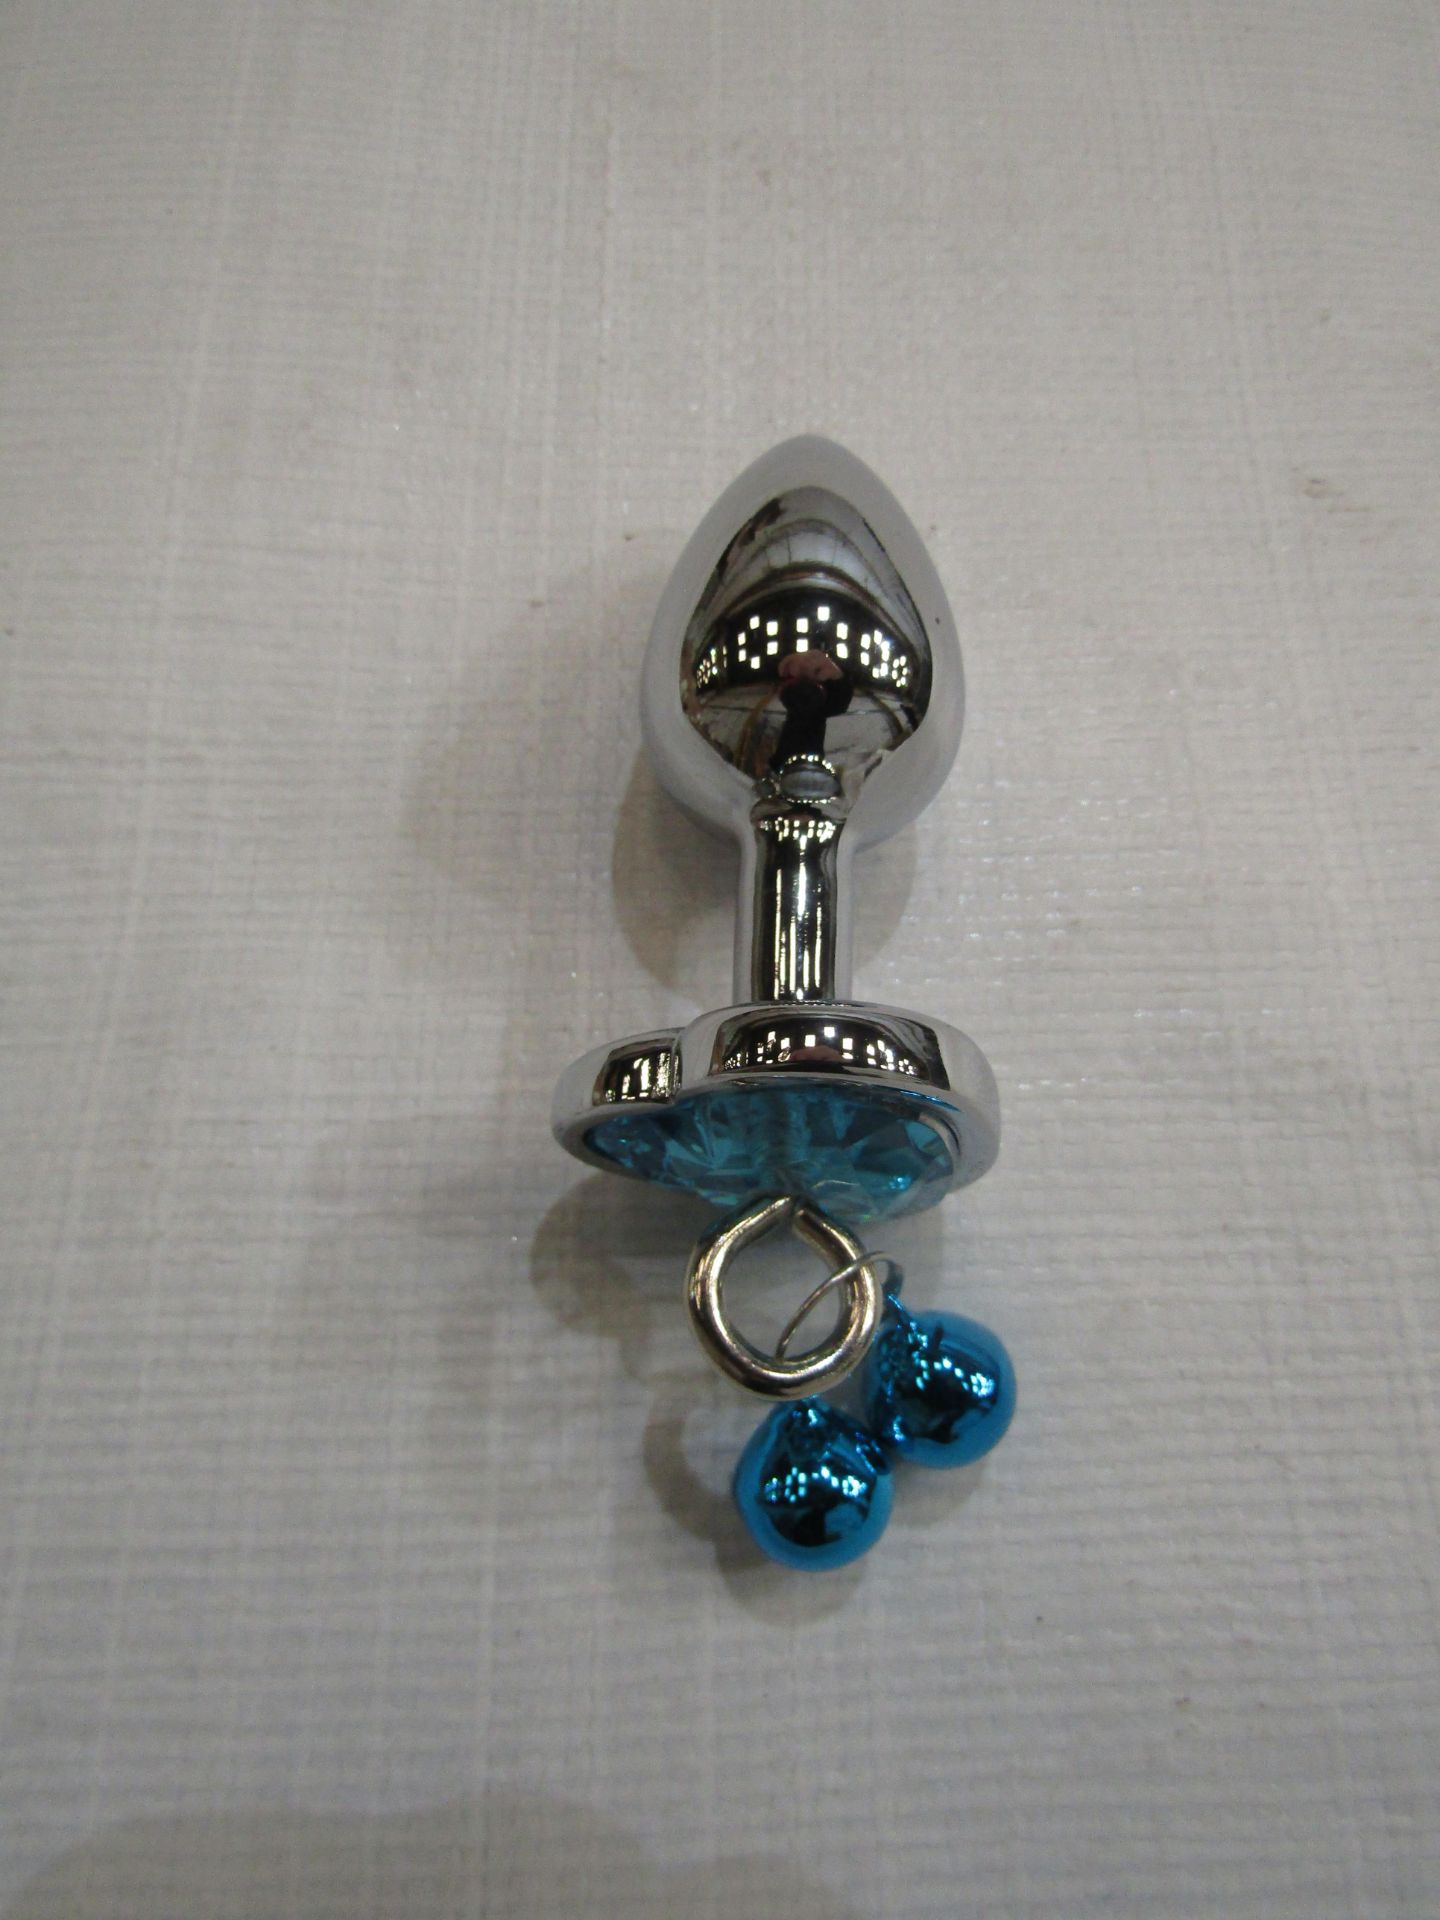 3x Love Heart Metal Butt Plug With Bells - New & Packaged.